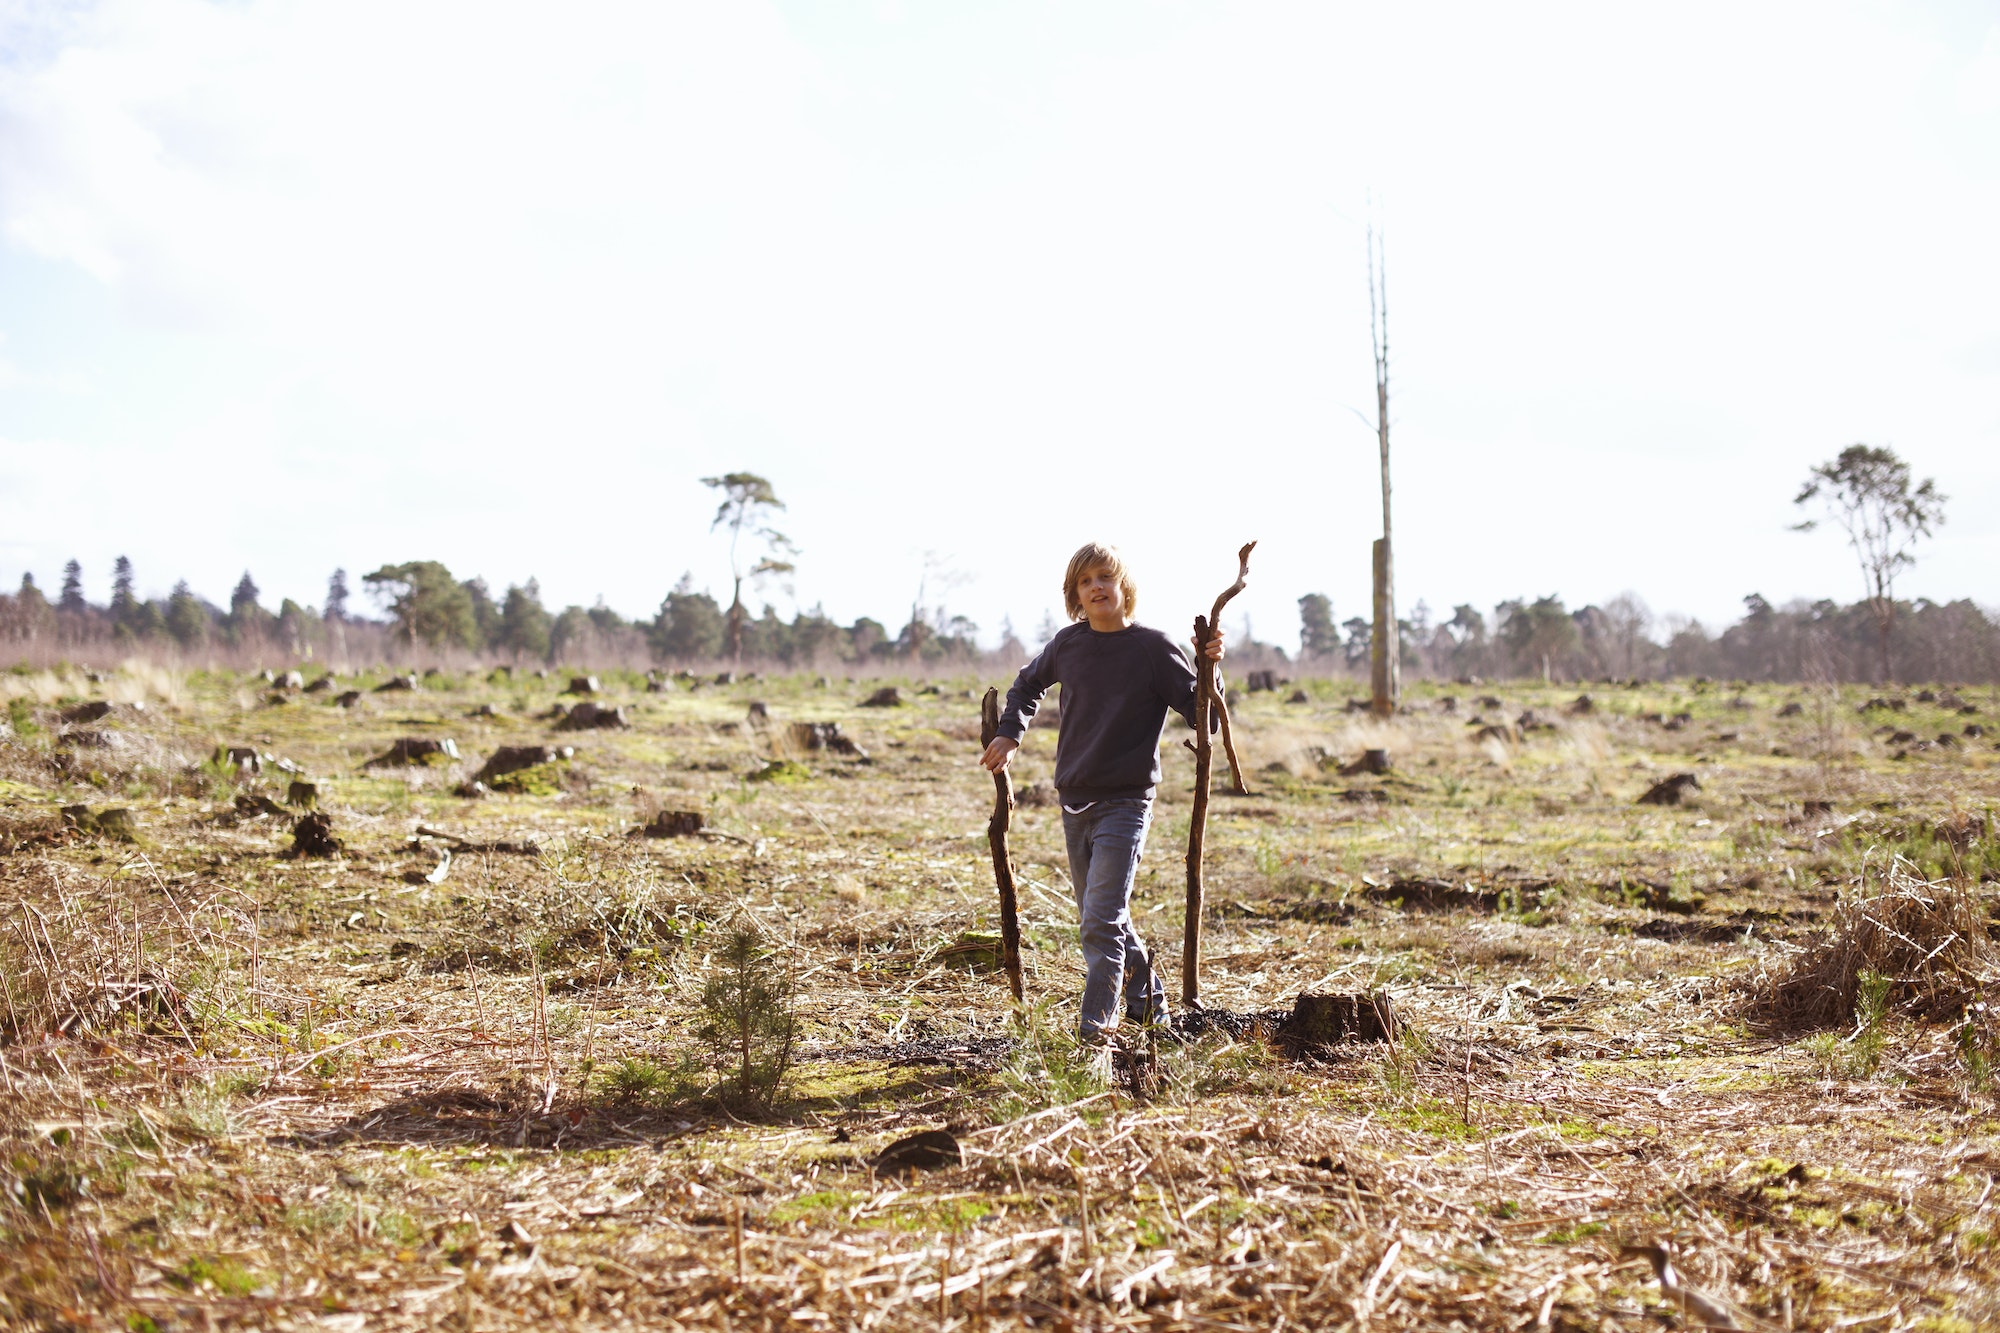 Boy carrying sticks in a plantation clearing